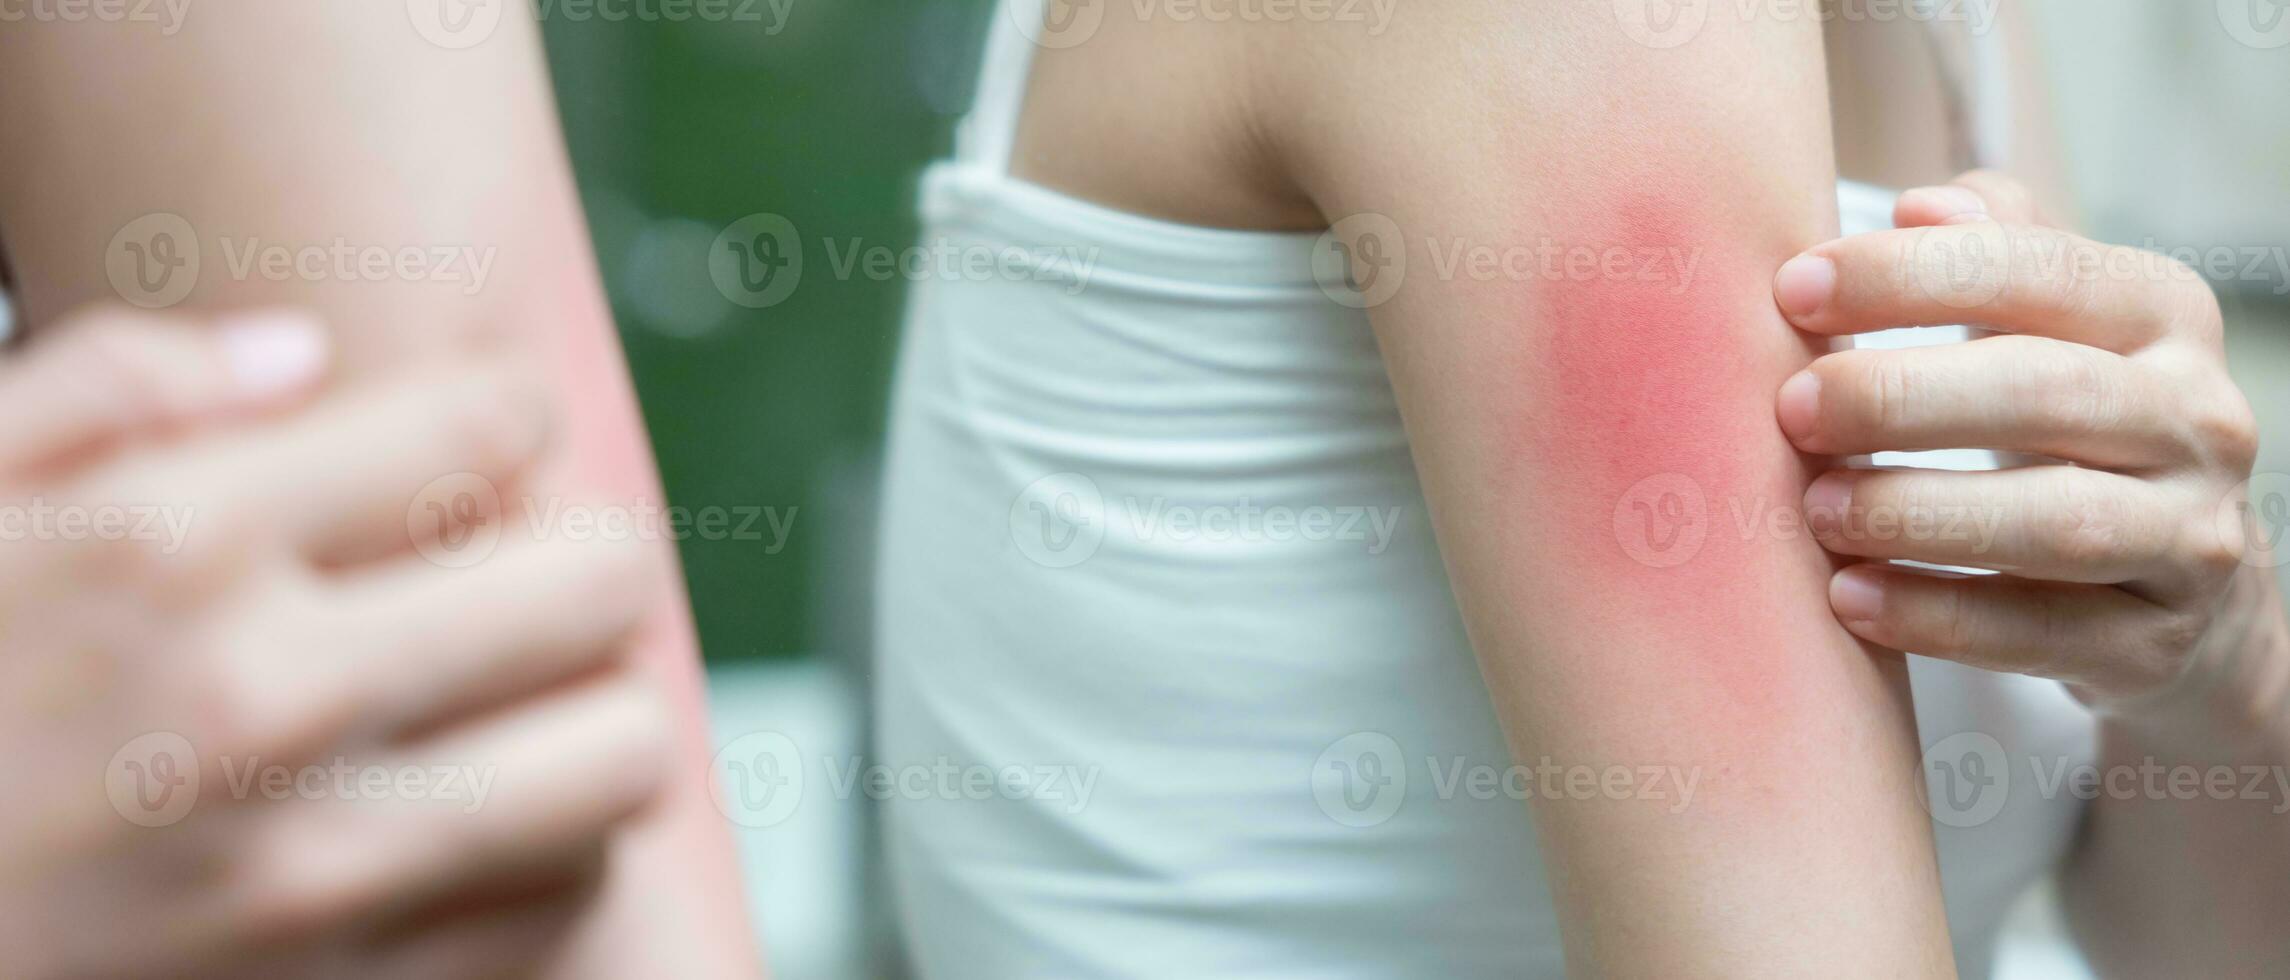 skin problem and beauty. Young woman scratch body has itchy skin from skin allergic, steroid allergy, sensitive skin, red from sunburn, chemical allergy, rash, insect bites, Seborrheic Dermatitis. photo